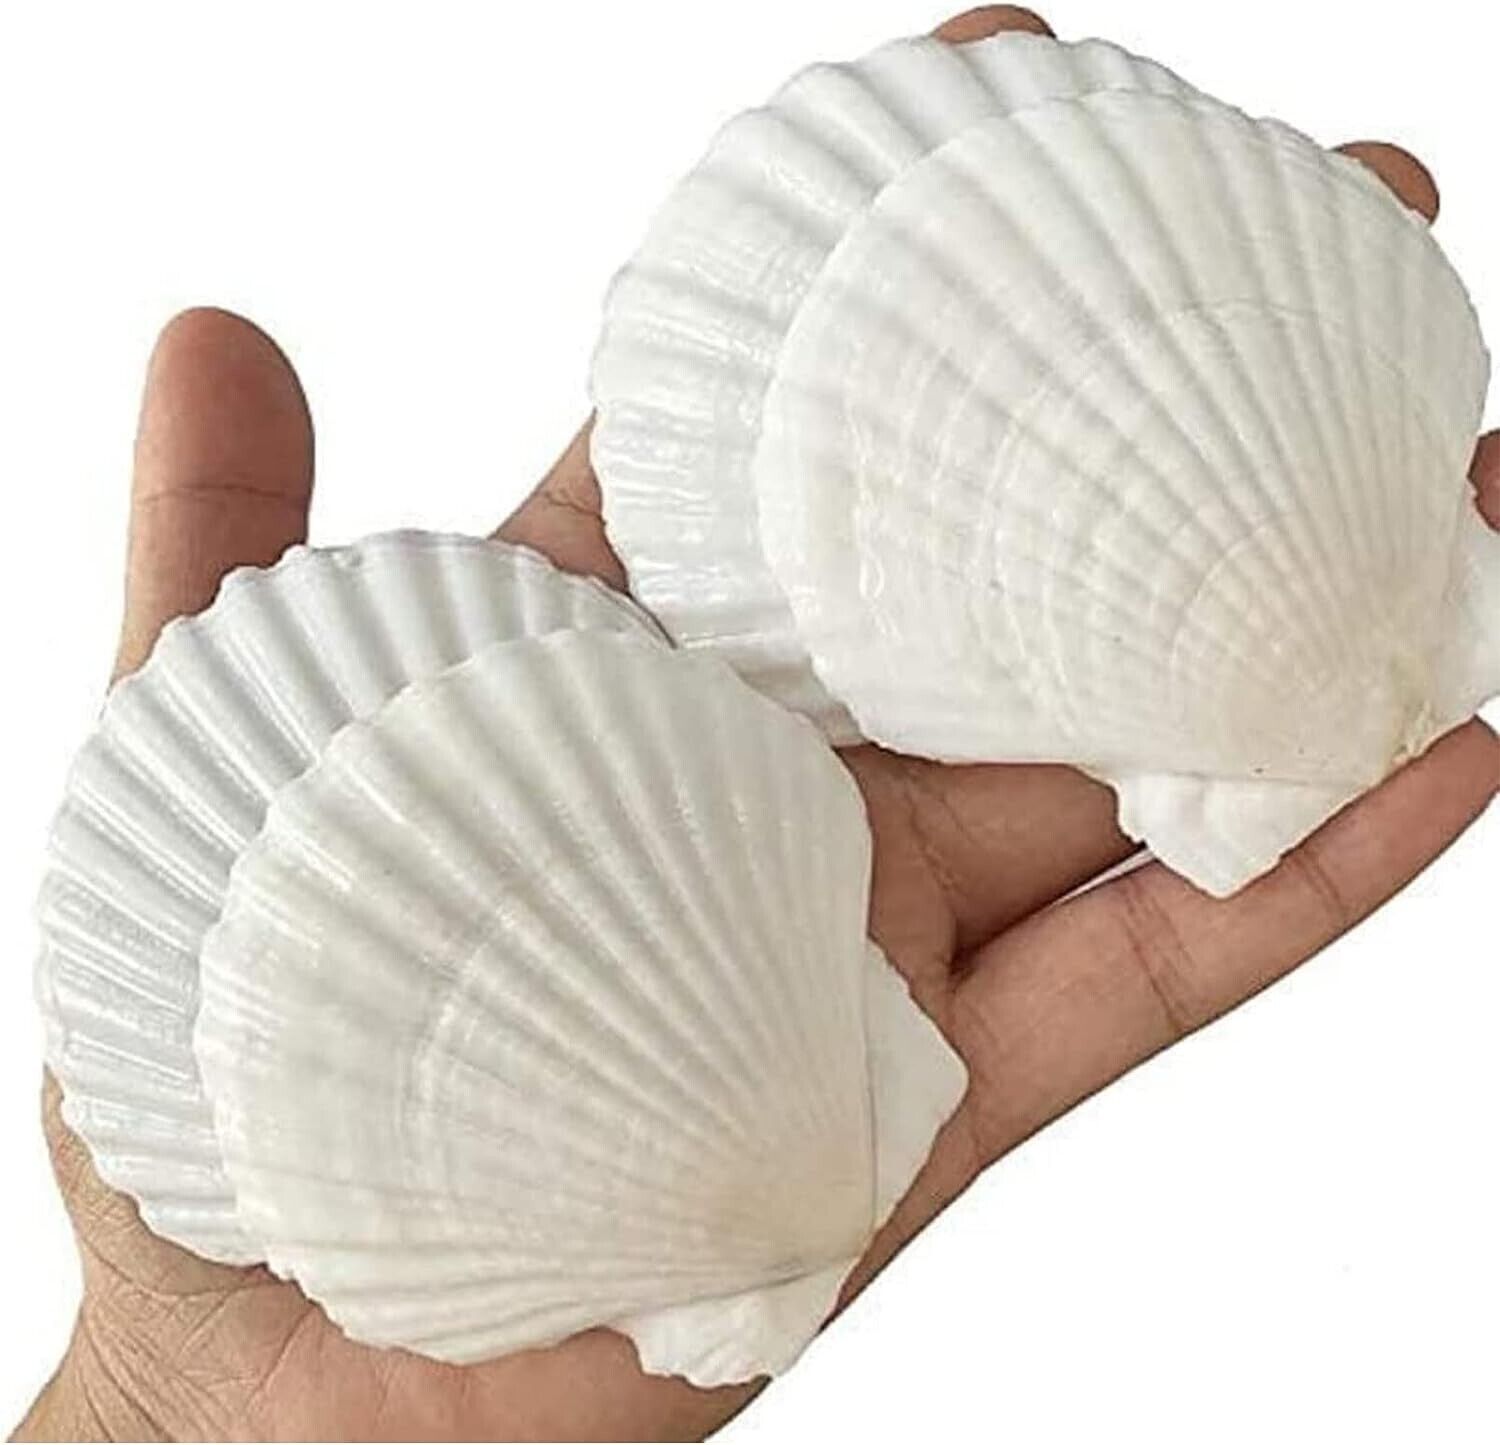 25PCS Sea Shells for Crafts Decoration Crafting 2'' 3'' White Scallop Shells New